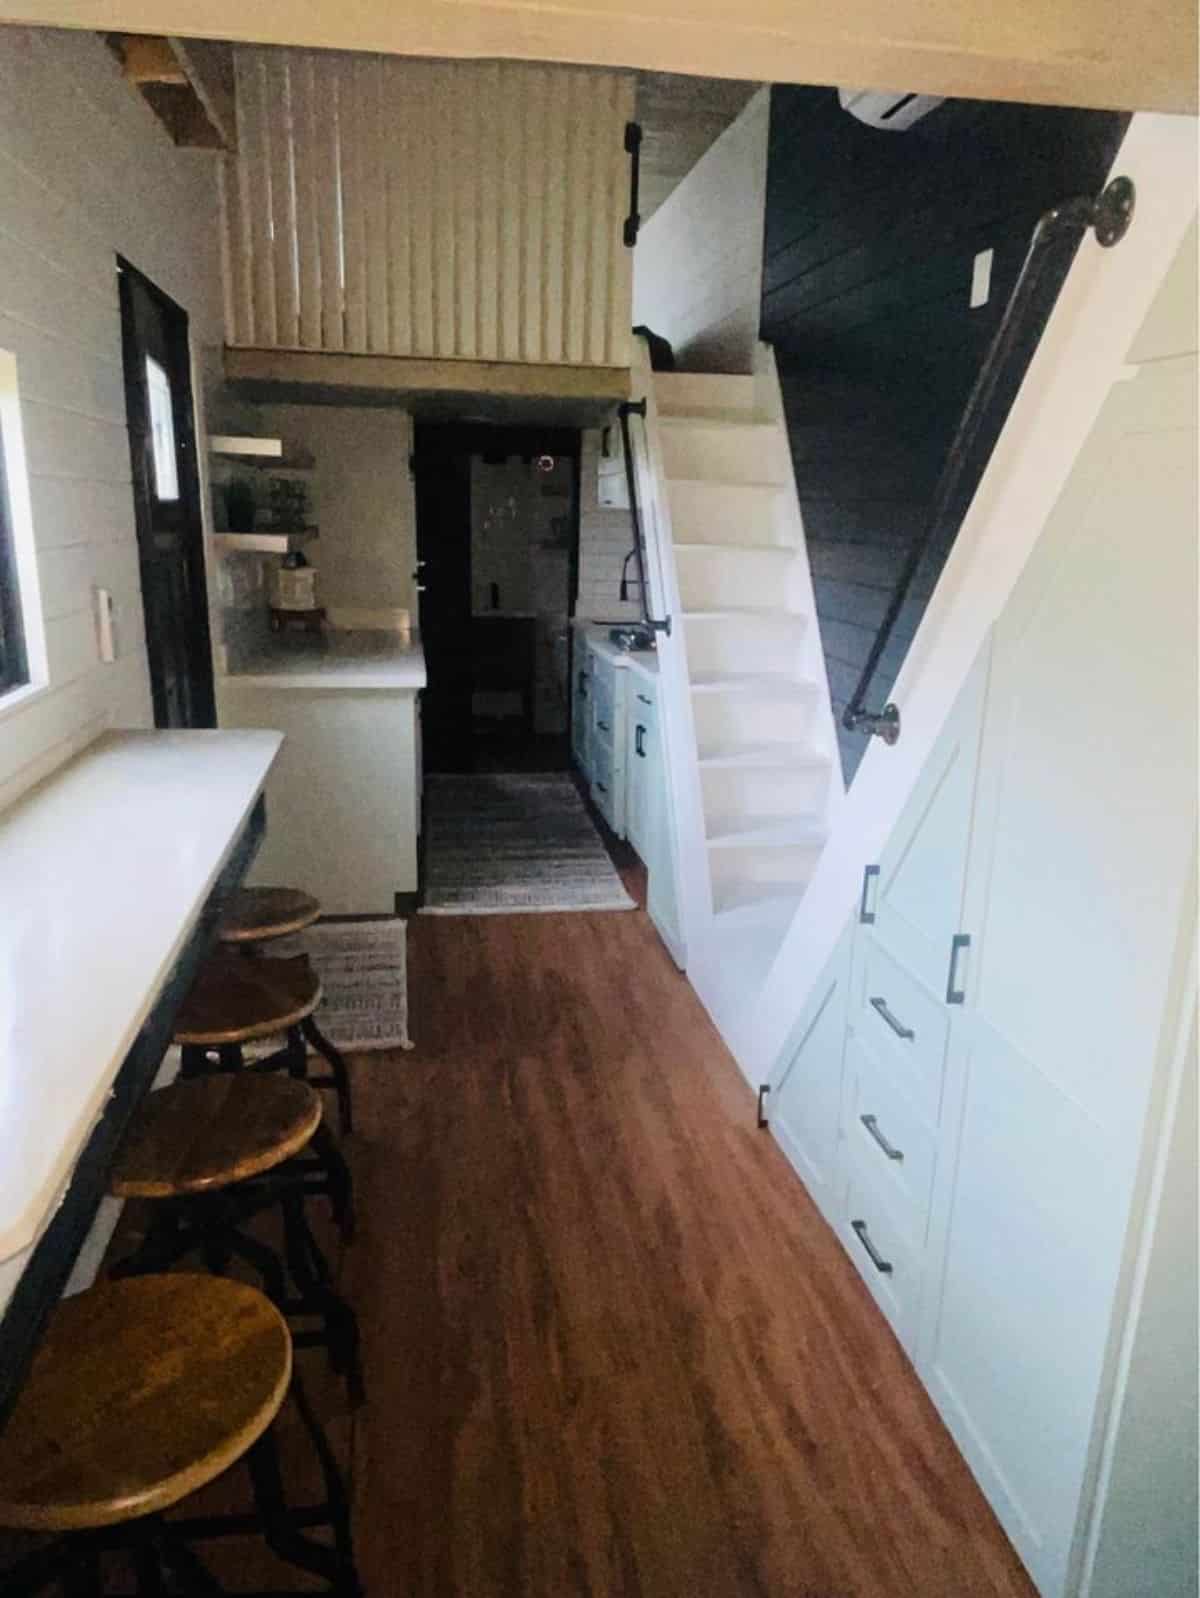 full view of brand-new tiny home from inside